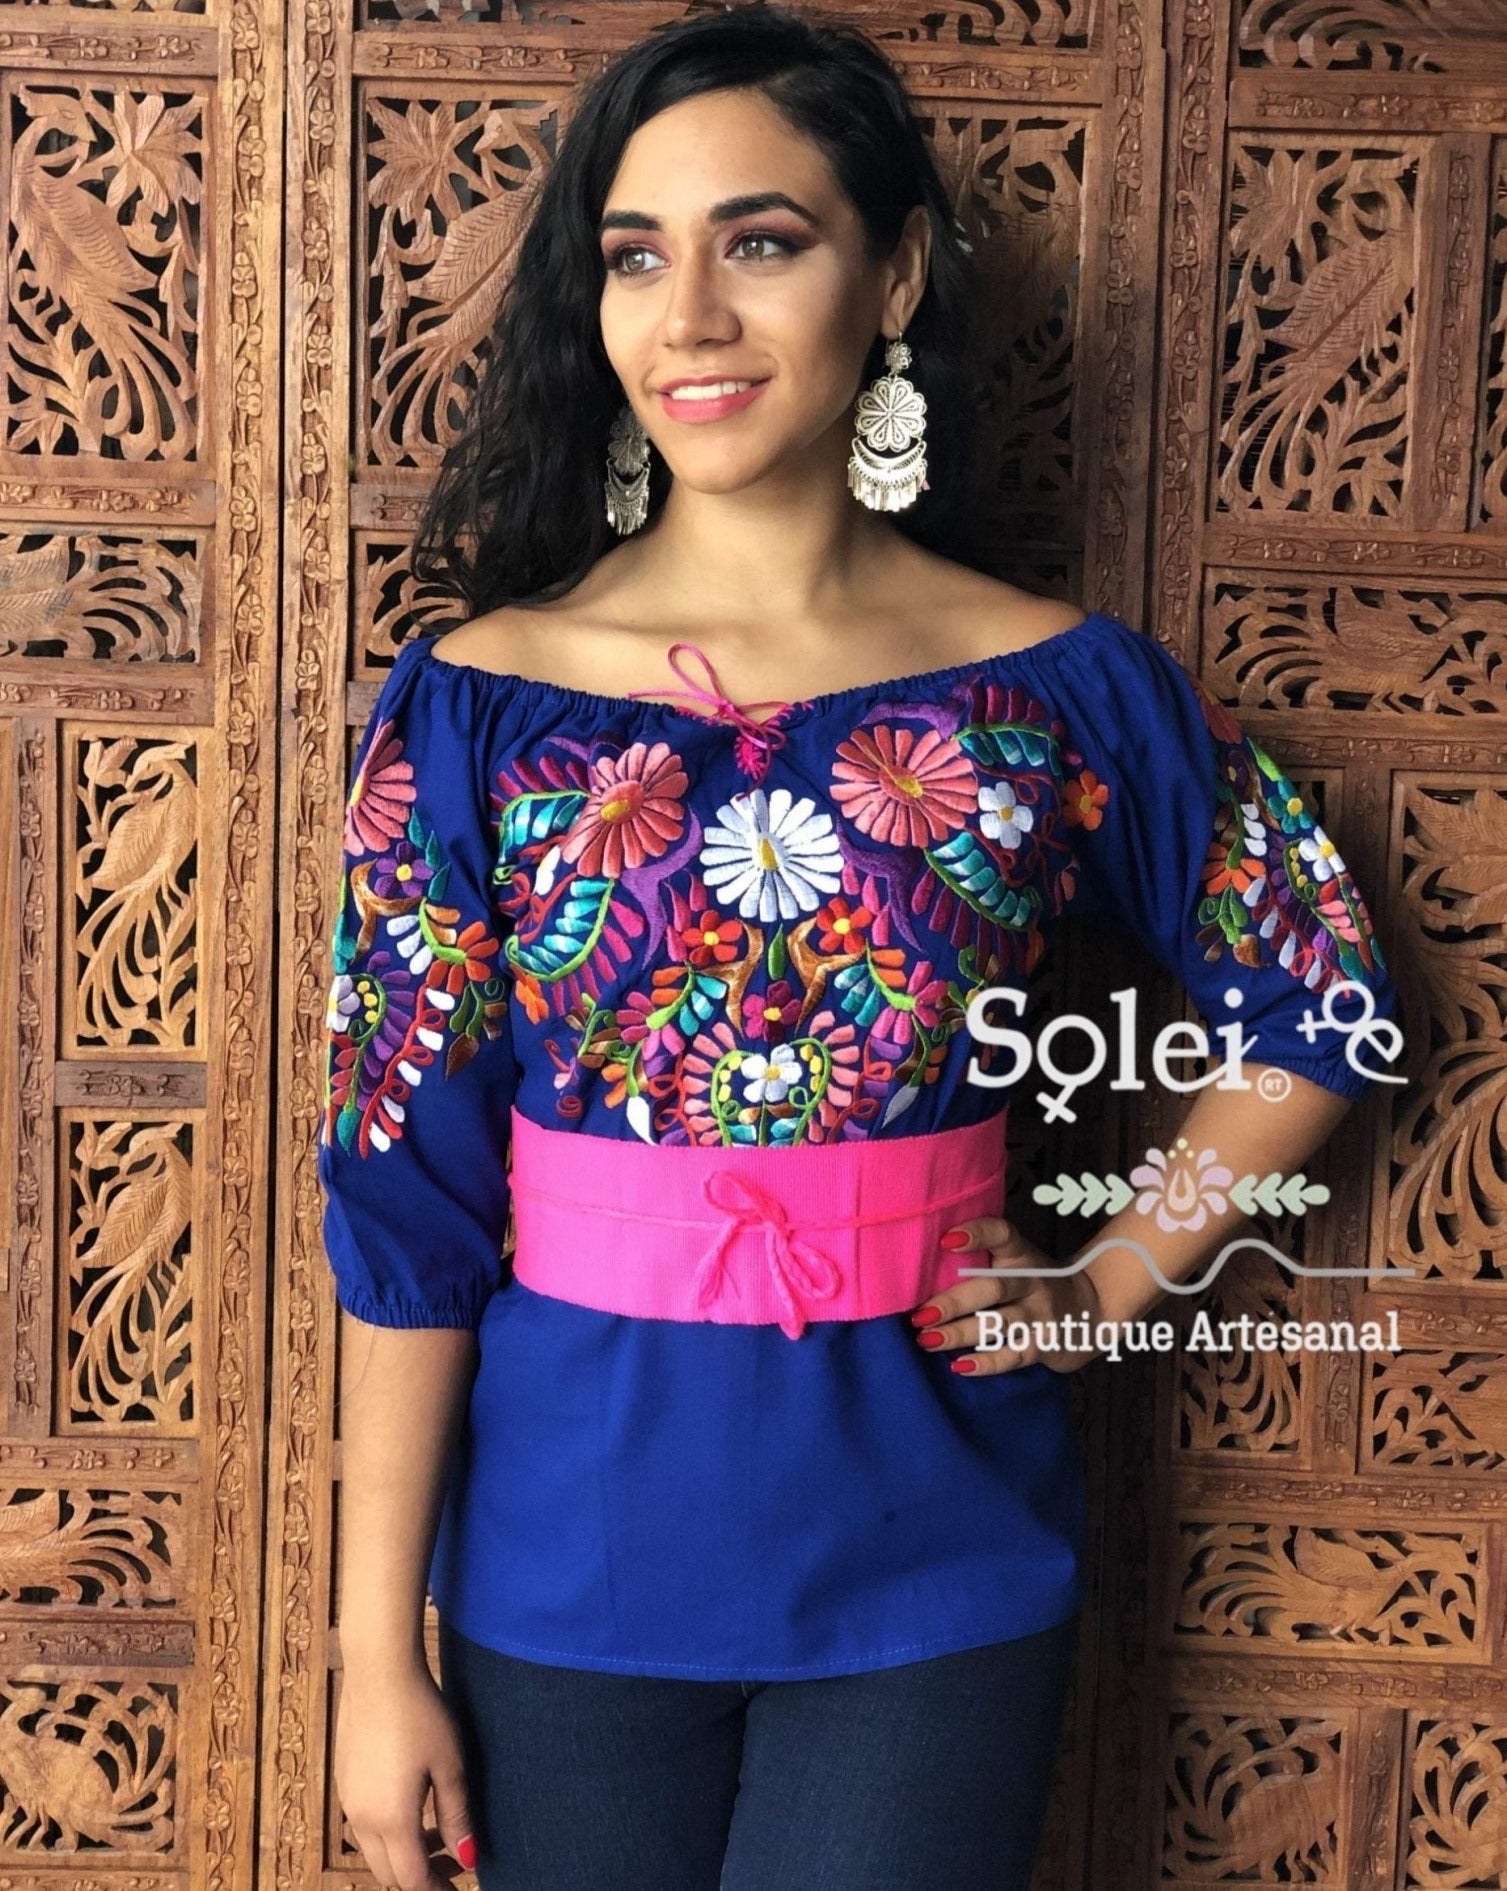 Andrea Blouse 3/4 sleeve smocked off-the-shoulder blouse, casual and formal blouse, great for all types look. - Solei Store